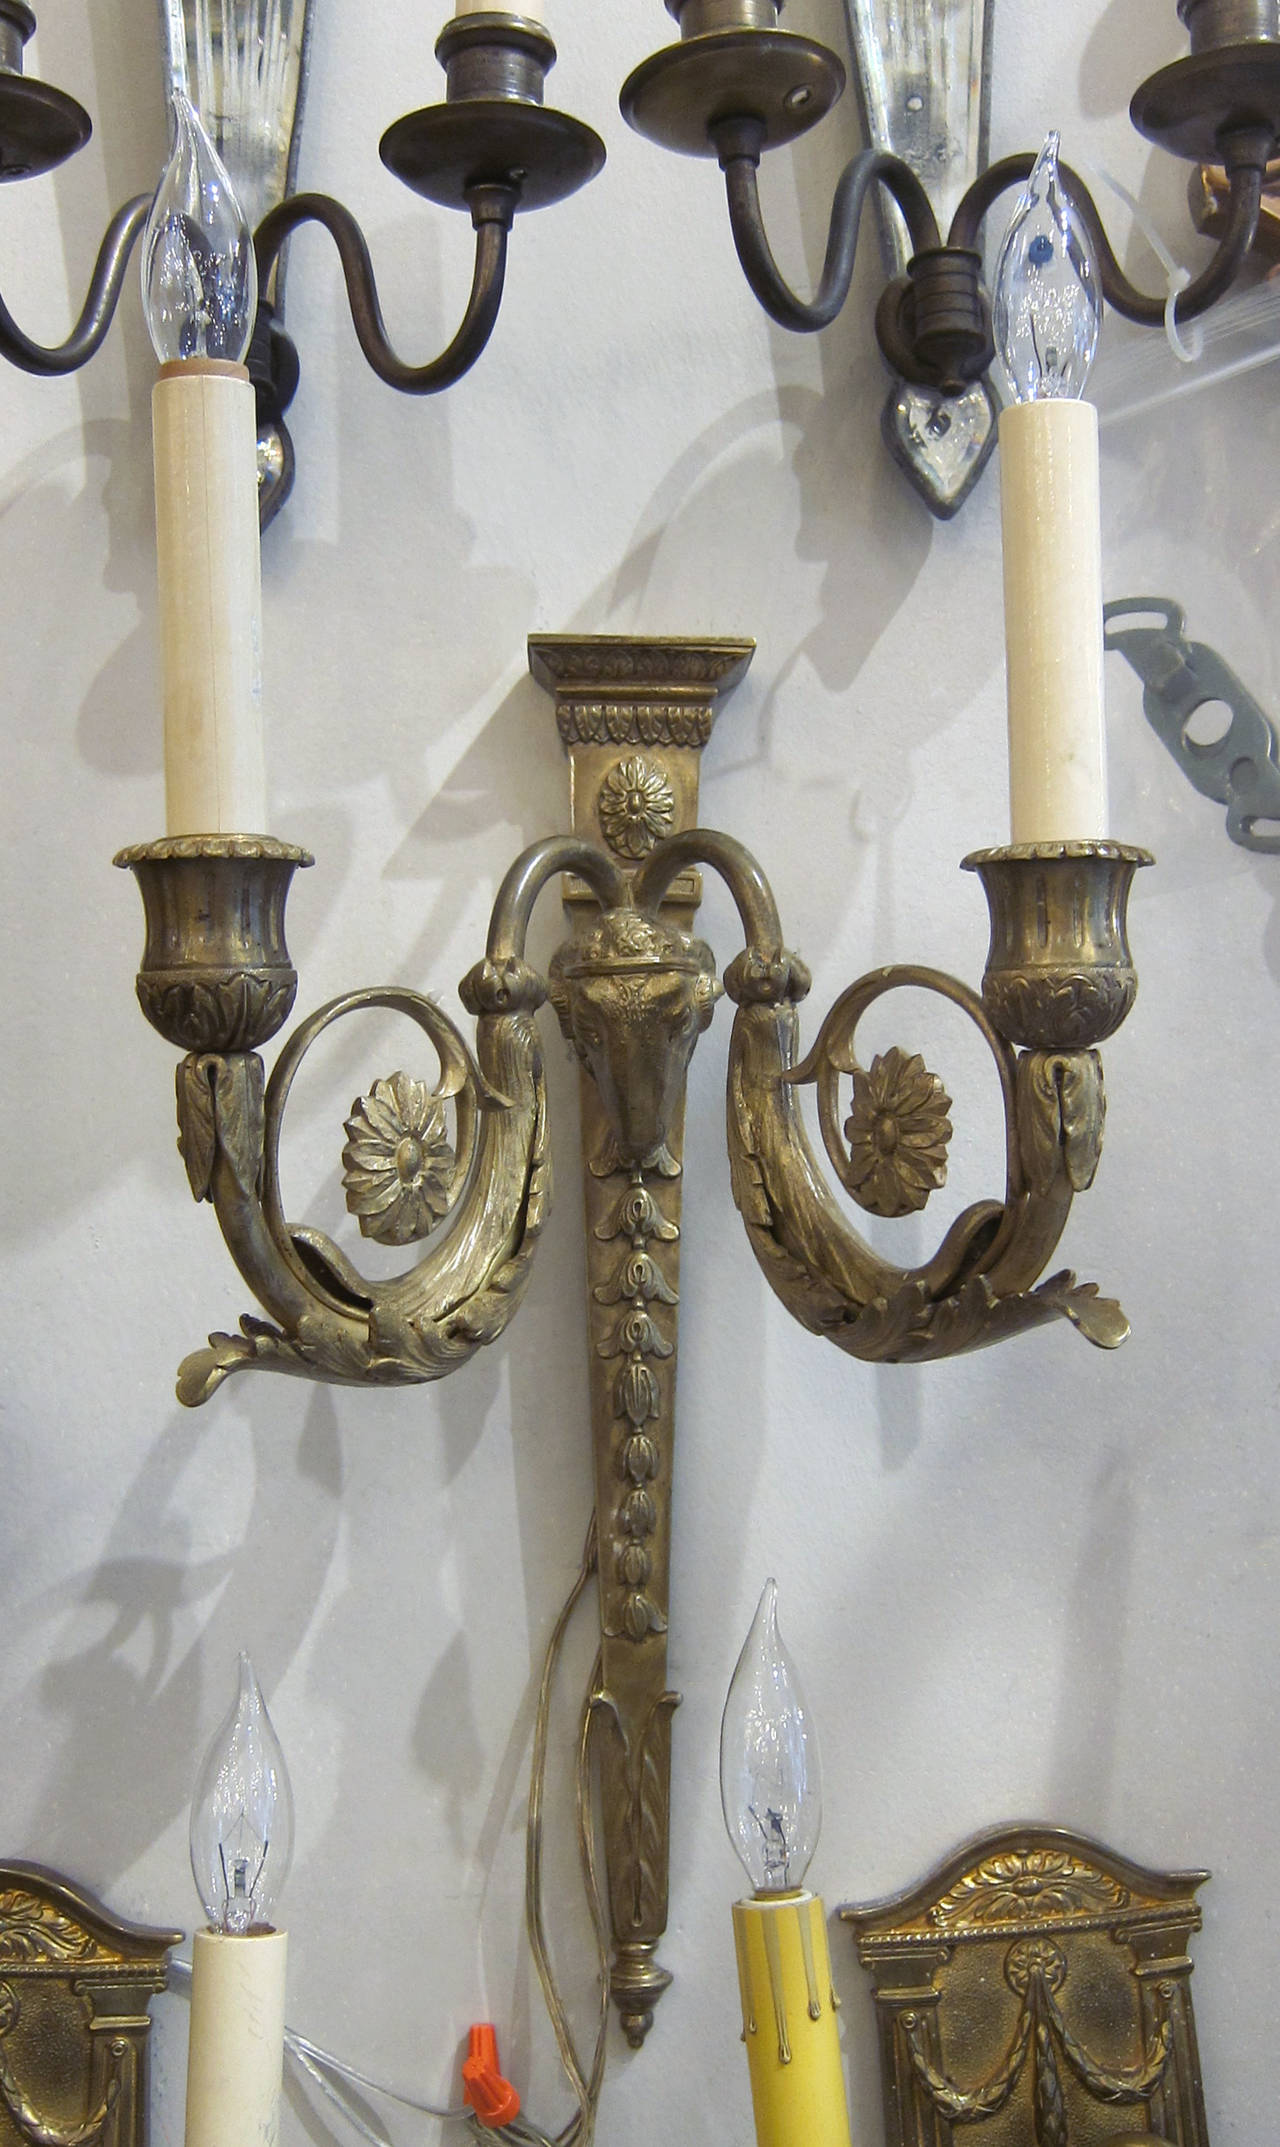 Pair of American made sconces by E. F. Caldwell of New York. Made in 1900s, These sconces is fashioned out of gilt bronze and presented in an Empire style.  This item can be viewed at our 5 East 16th St, Union Square location in Manhattan.